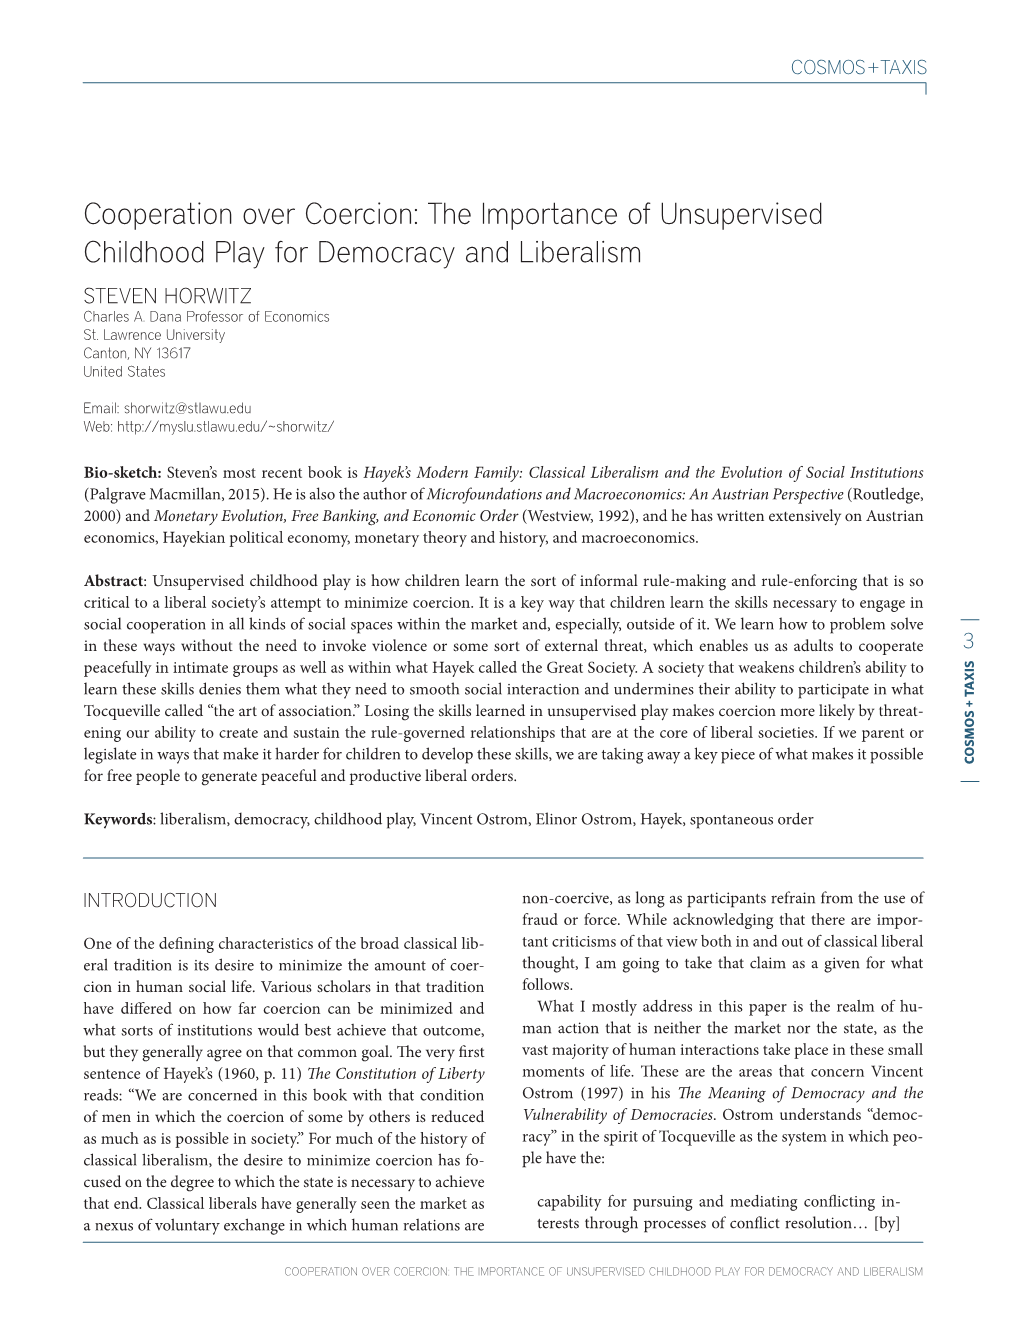 Cooperation Over Coercion: the Importance of Unsupervised Childhood Play for Democracy and Liberalism STEVEN HORWITZ Charles A